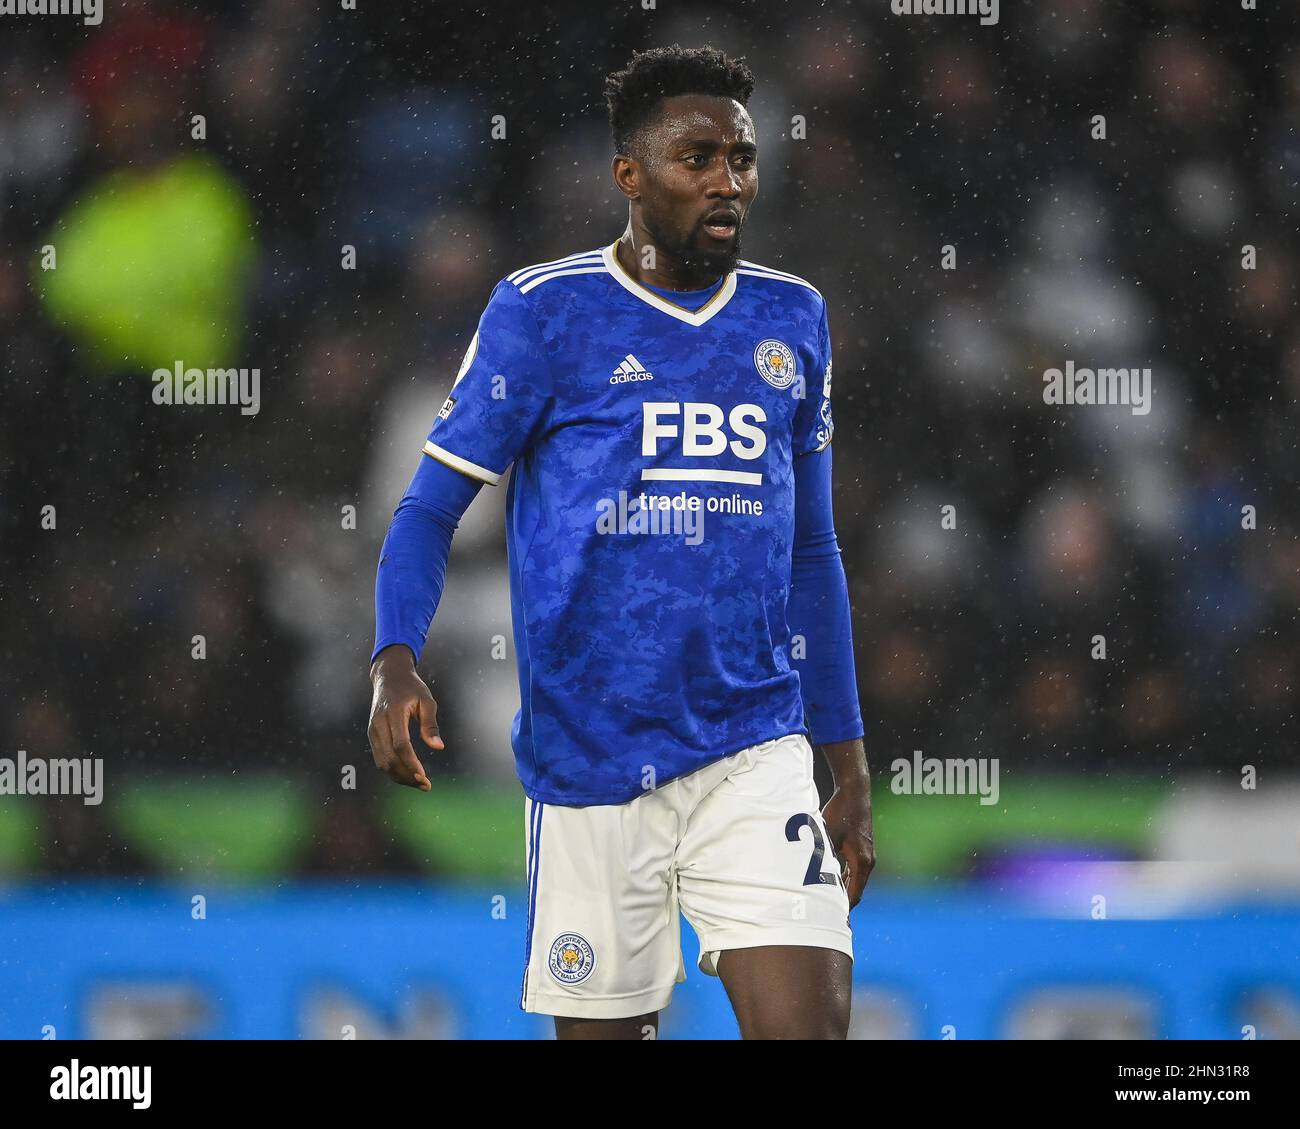 Wilfred Ndidi #25 of Leicester City during the game in, on 2/13/2022. (Photo by Craig Thomas/News Images/Sipa USA) Credit: Sipa USA/Alamy Live News Stock Photo